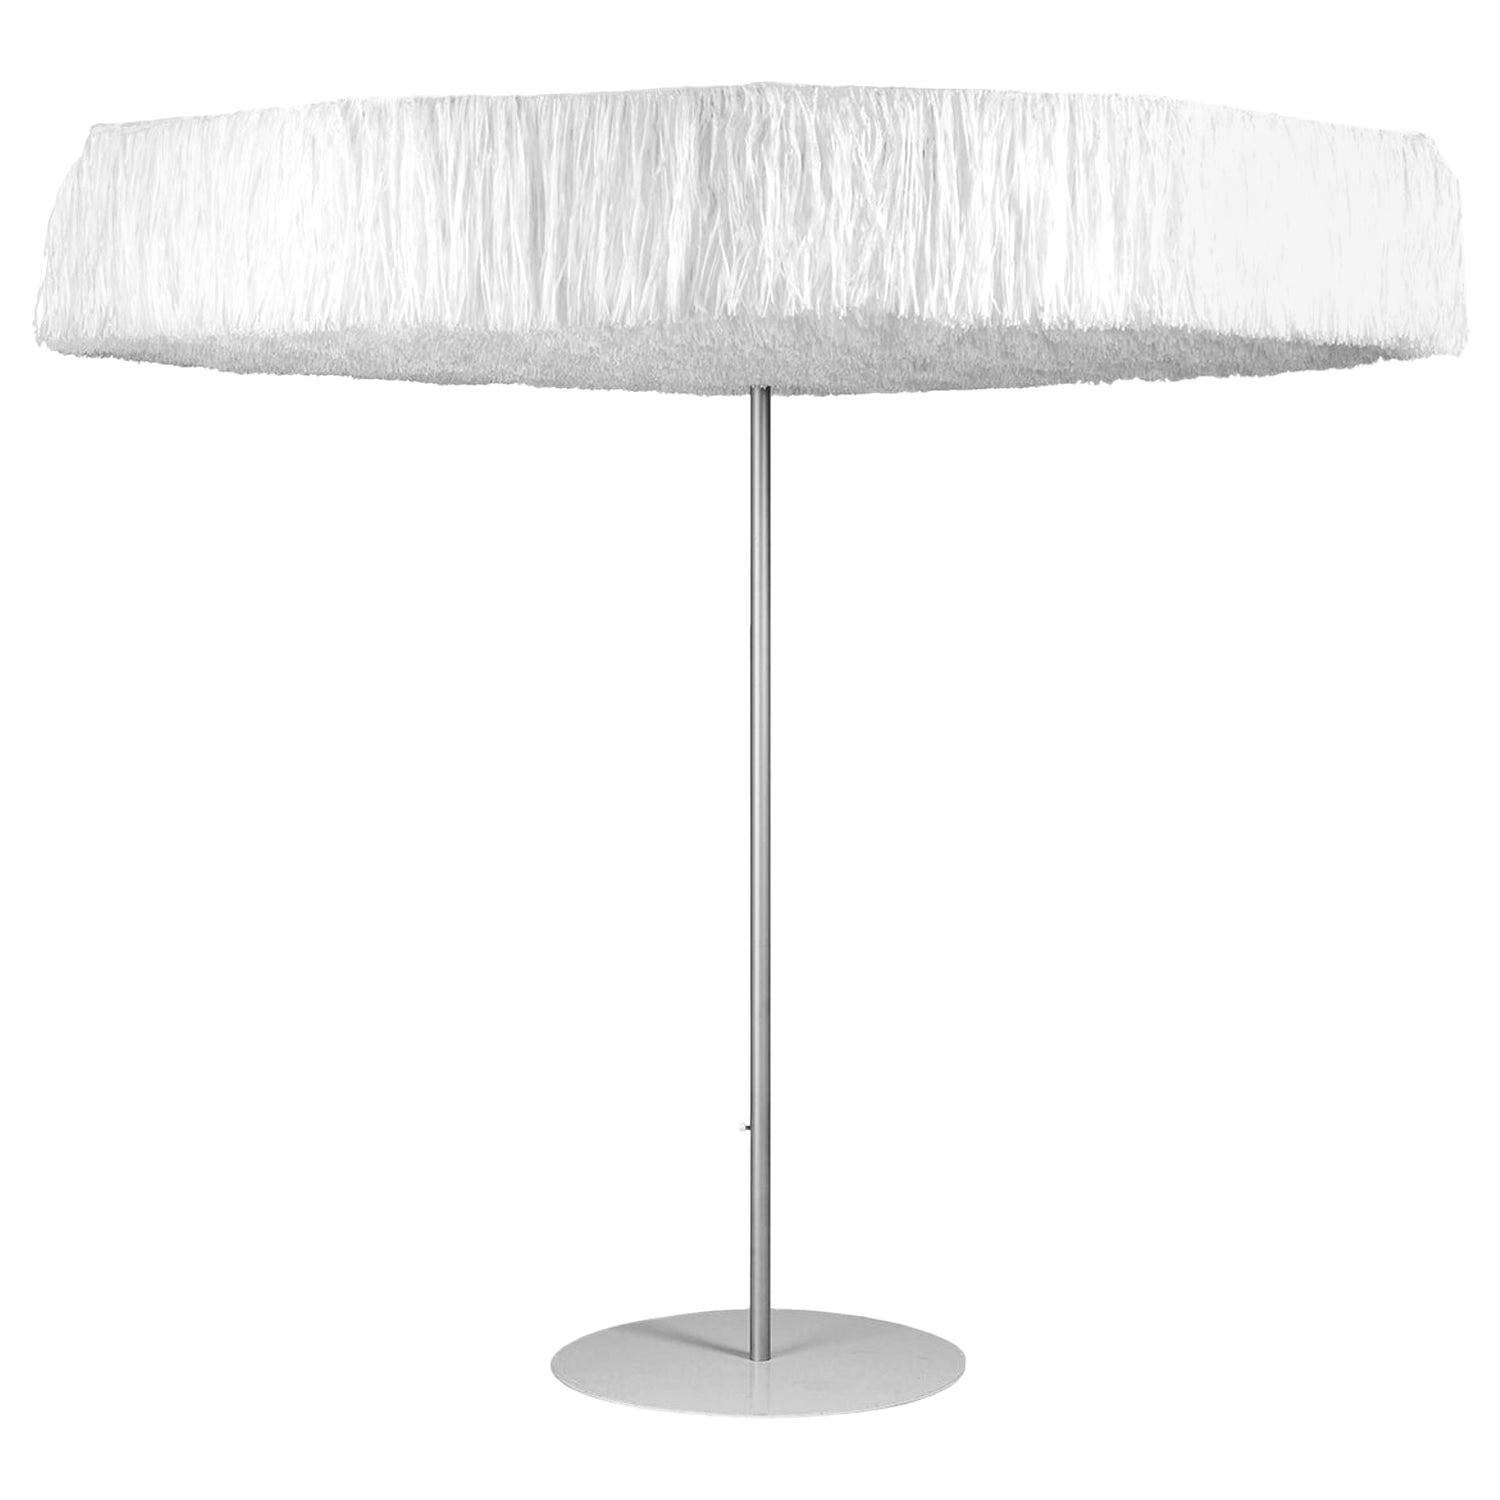 White Outdoor Fringe Parasol, Designed by Davy Grosemans, Made in Italy